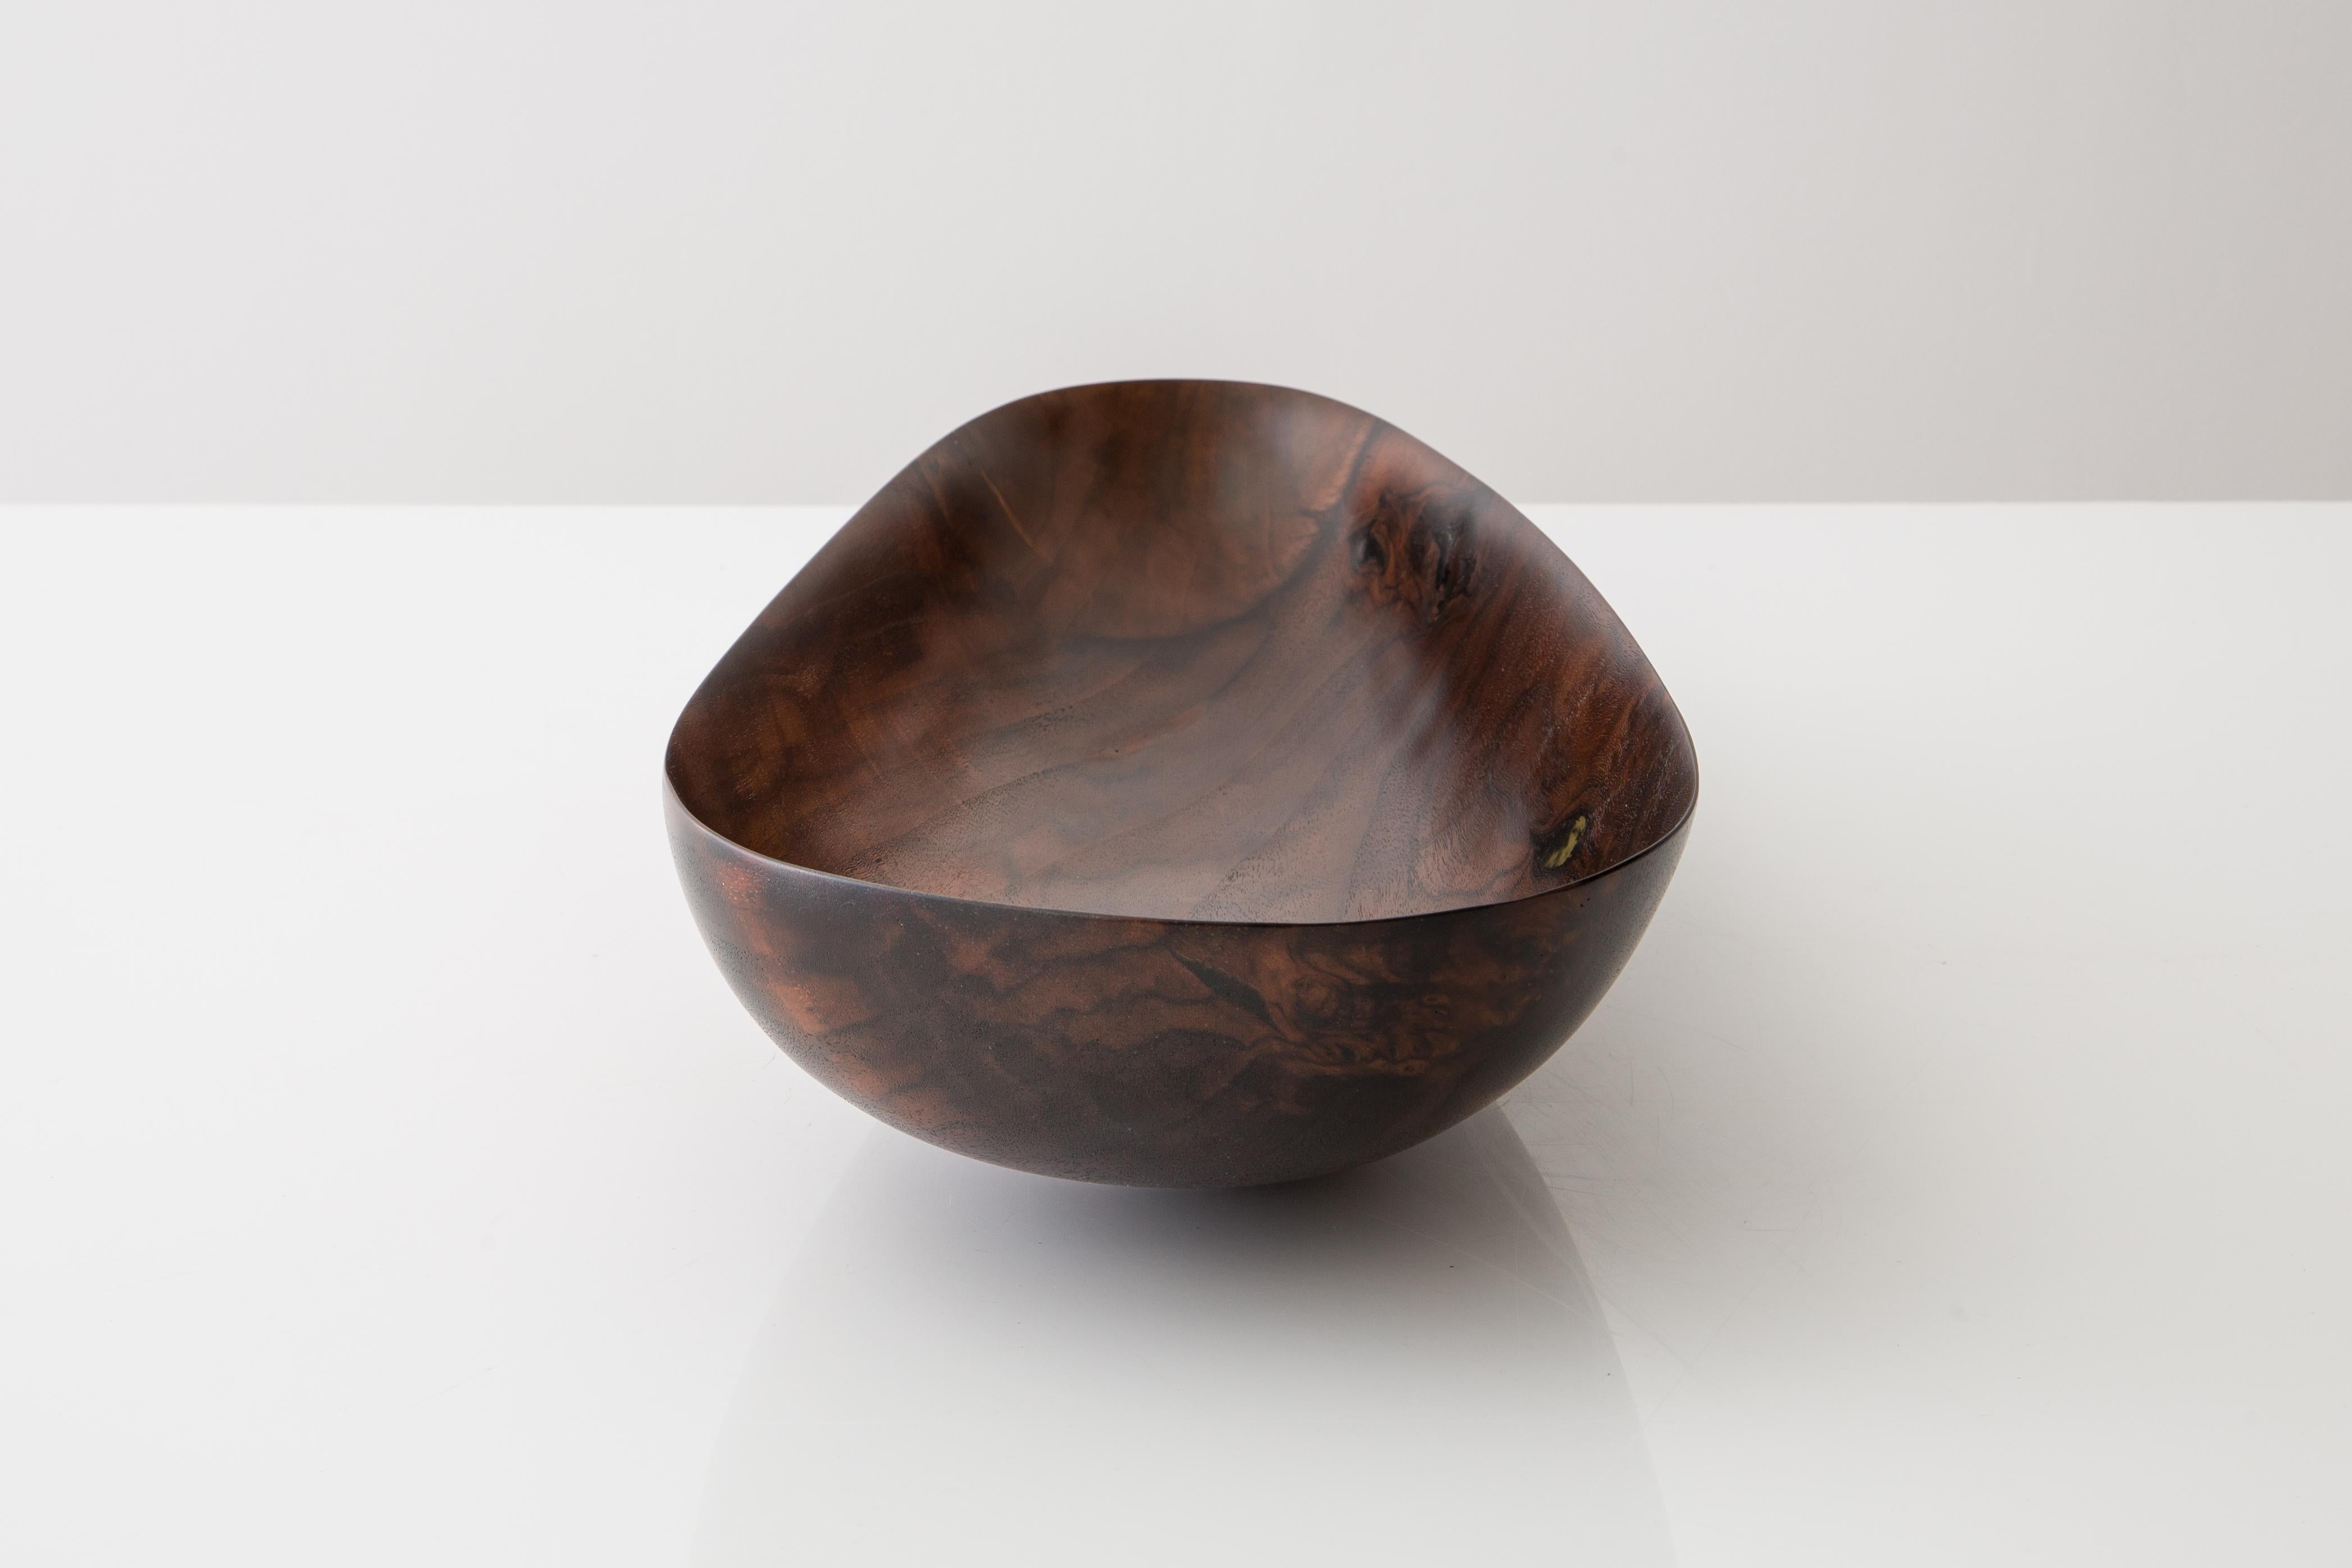 Wood CARVED Solid Walnut Asymmetrical Bowl, by Richard Haining, Available Now